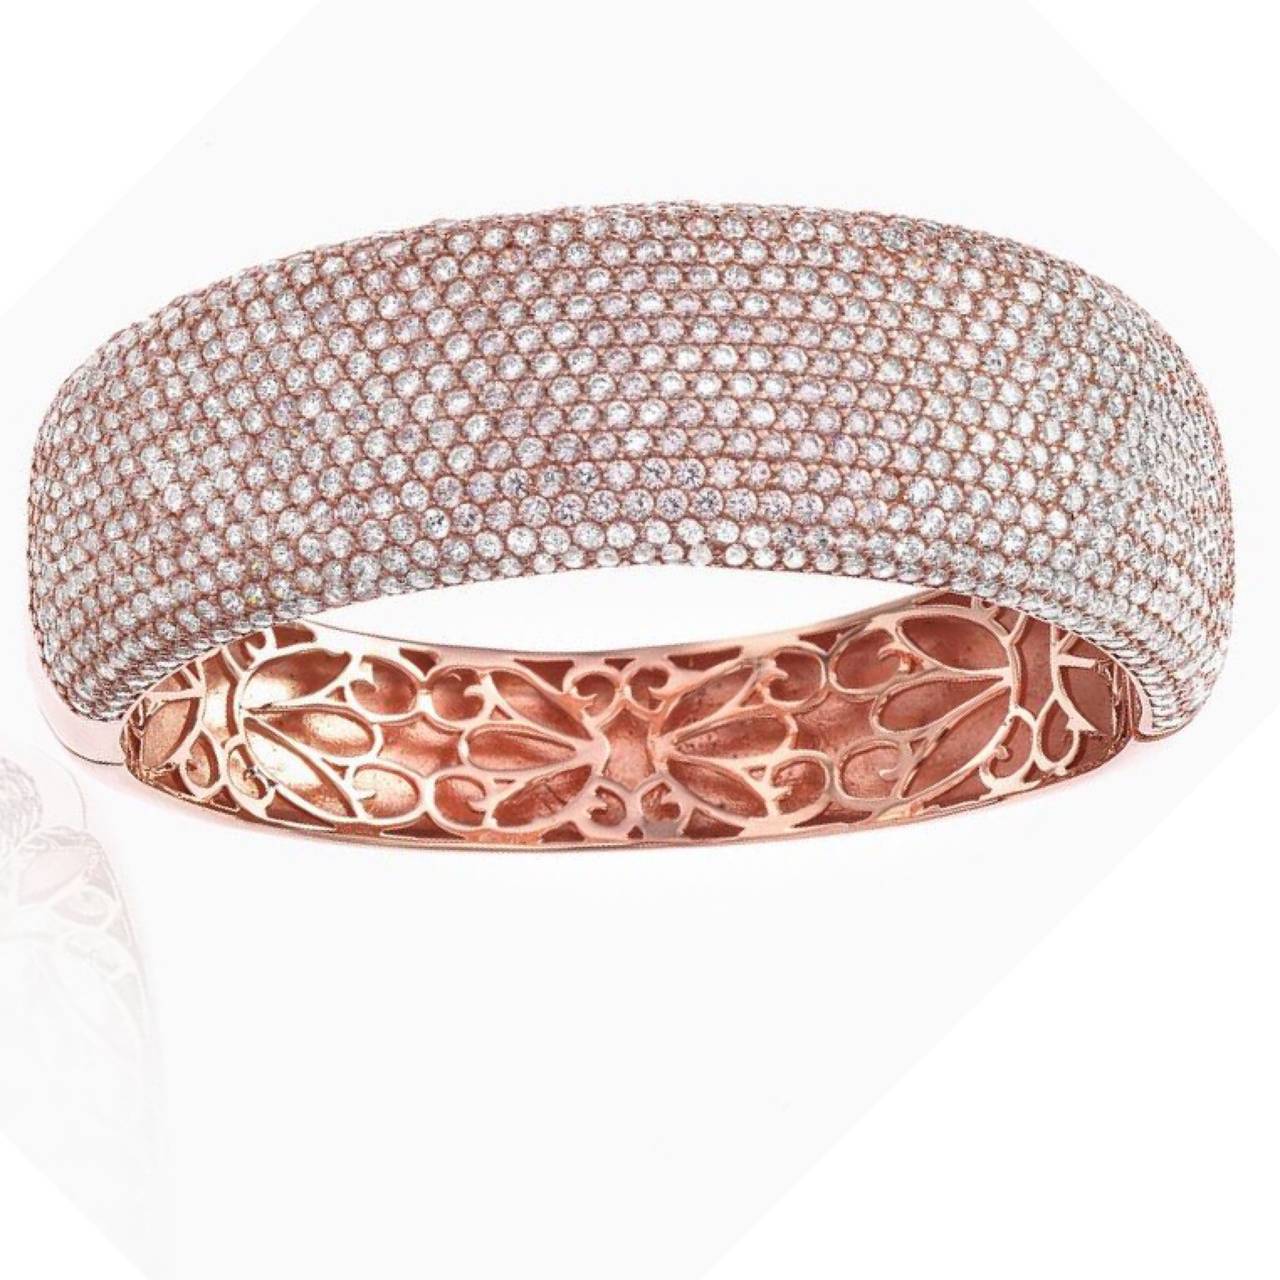 Hand made by our skilled craftsmen in 18K Rose gold! We carefully selected 772 white round perfectly cut natural diamonds to create this masterpiece diamond bangle. This bangle features an astonishing 15 rows of micro pave diamonds. Micro pave is a